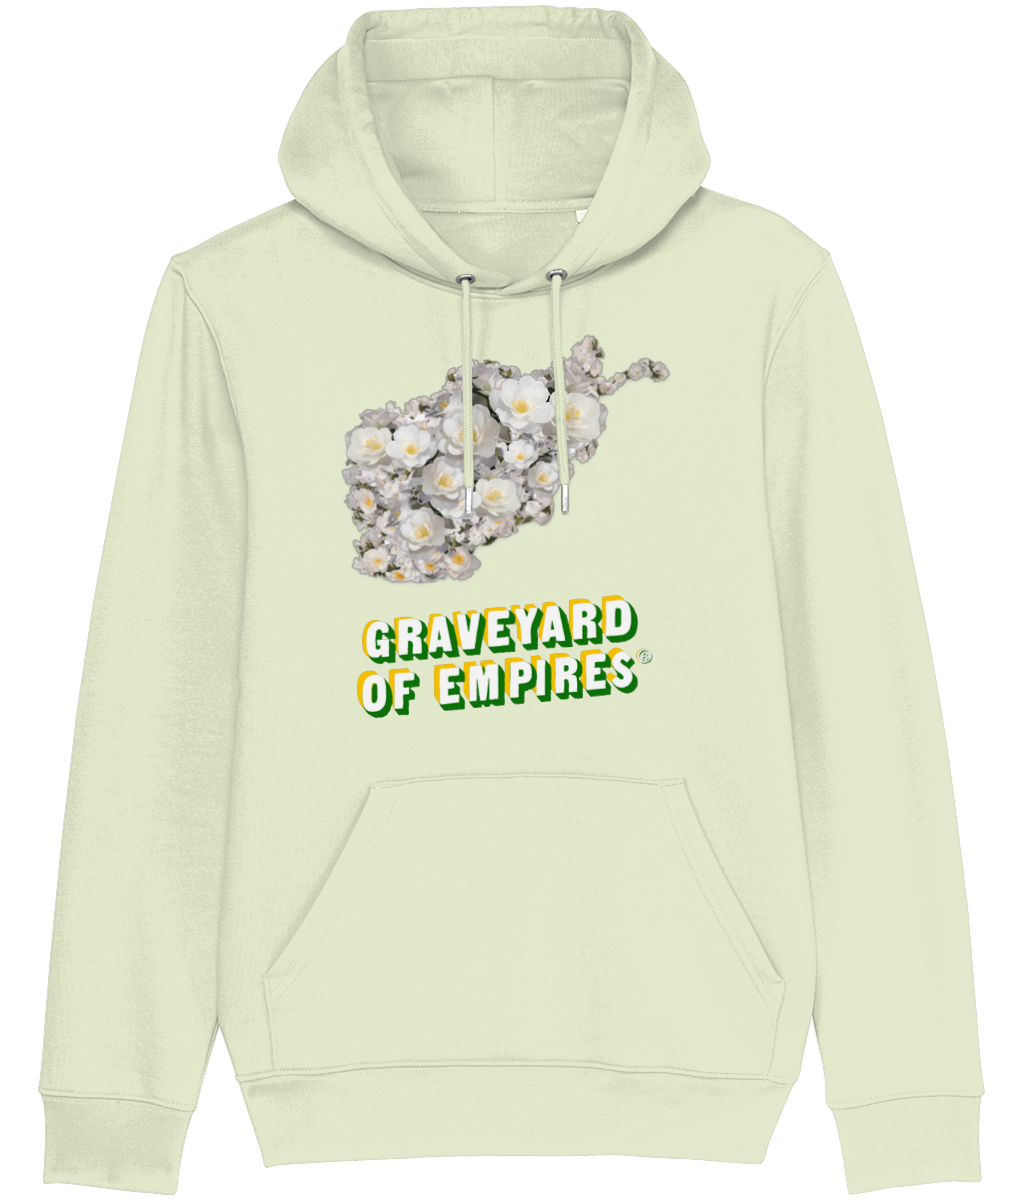 "Blossoming Resilience" Hoodie